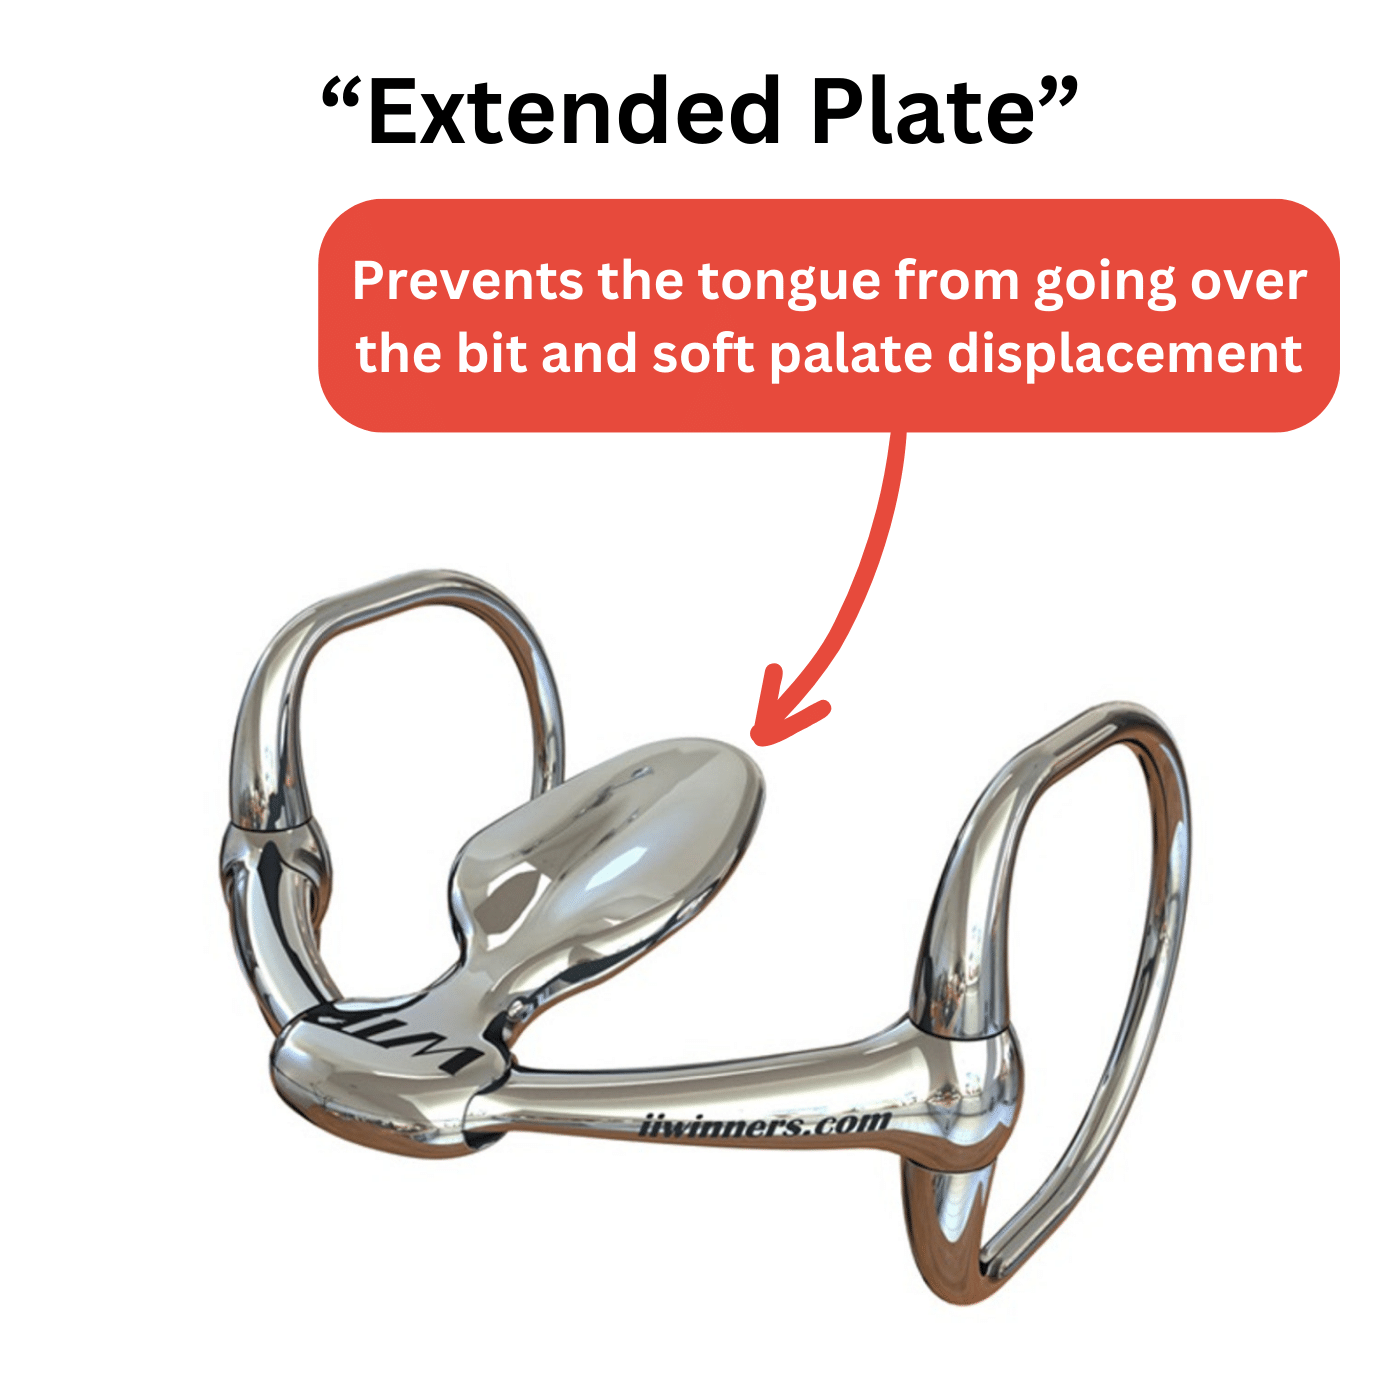 WTP (Winning Tongue Plate) Eggbutt Bit with Extended Plate